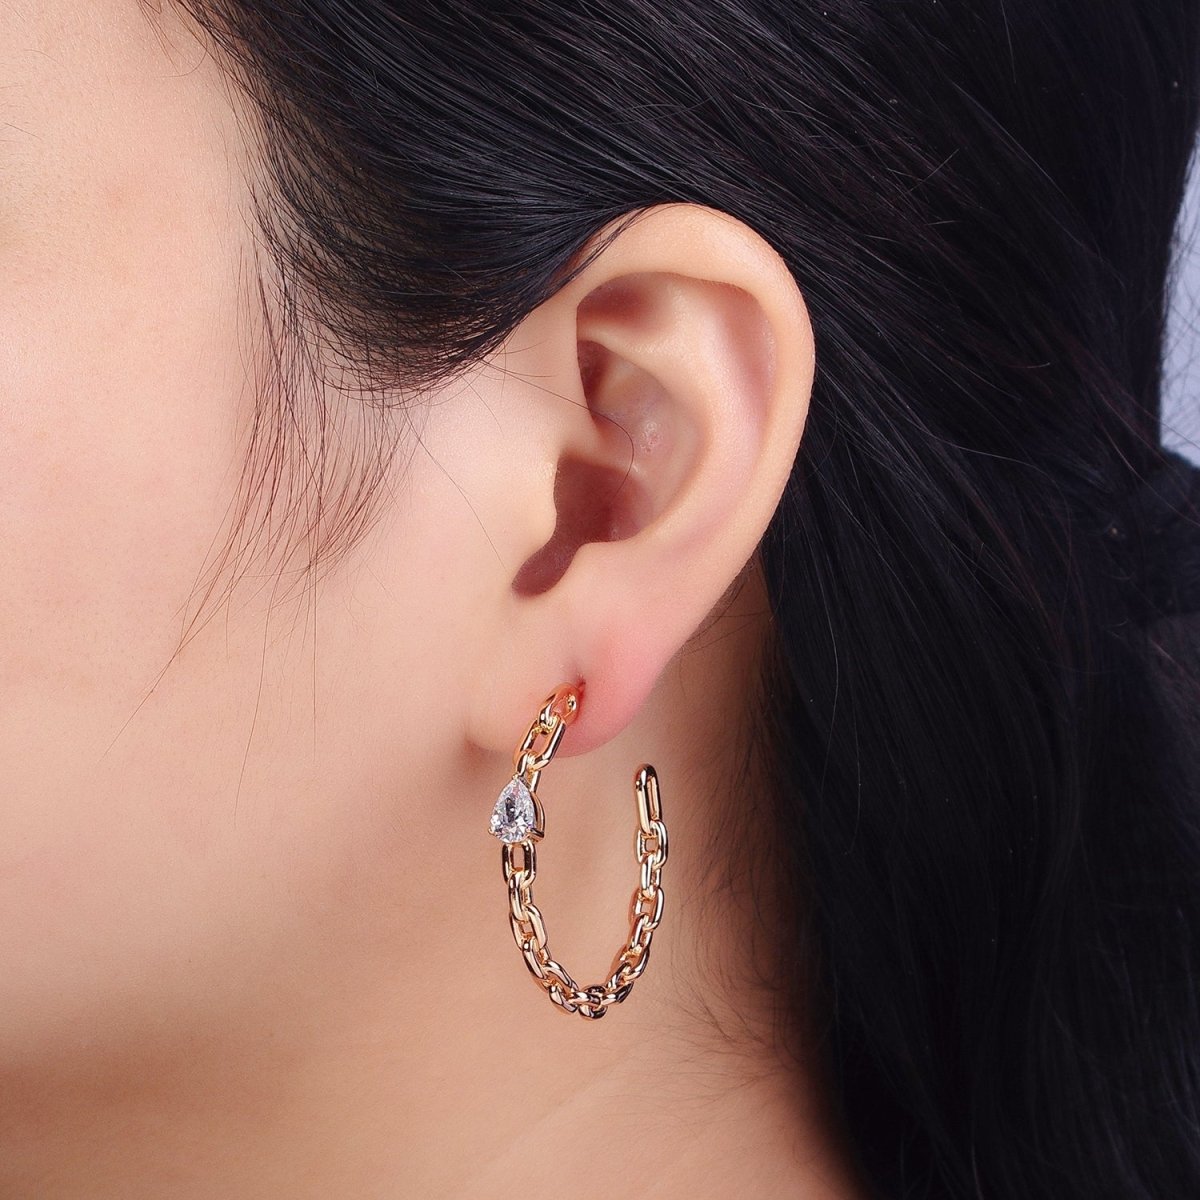 Clear Teardrop CZ C-Shaped Cable Paperclip Chain Link 38mm Hoop Earrings | AB159 - DLUXCA